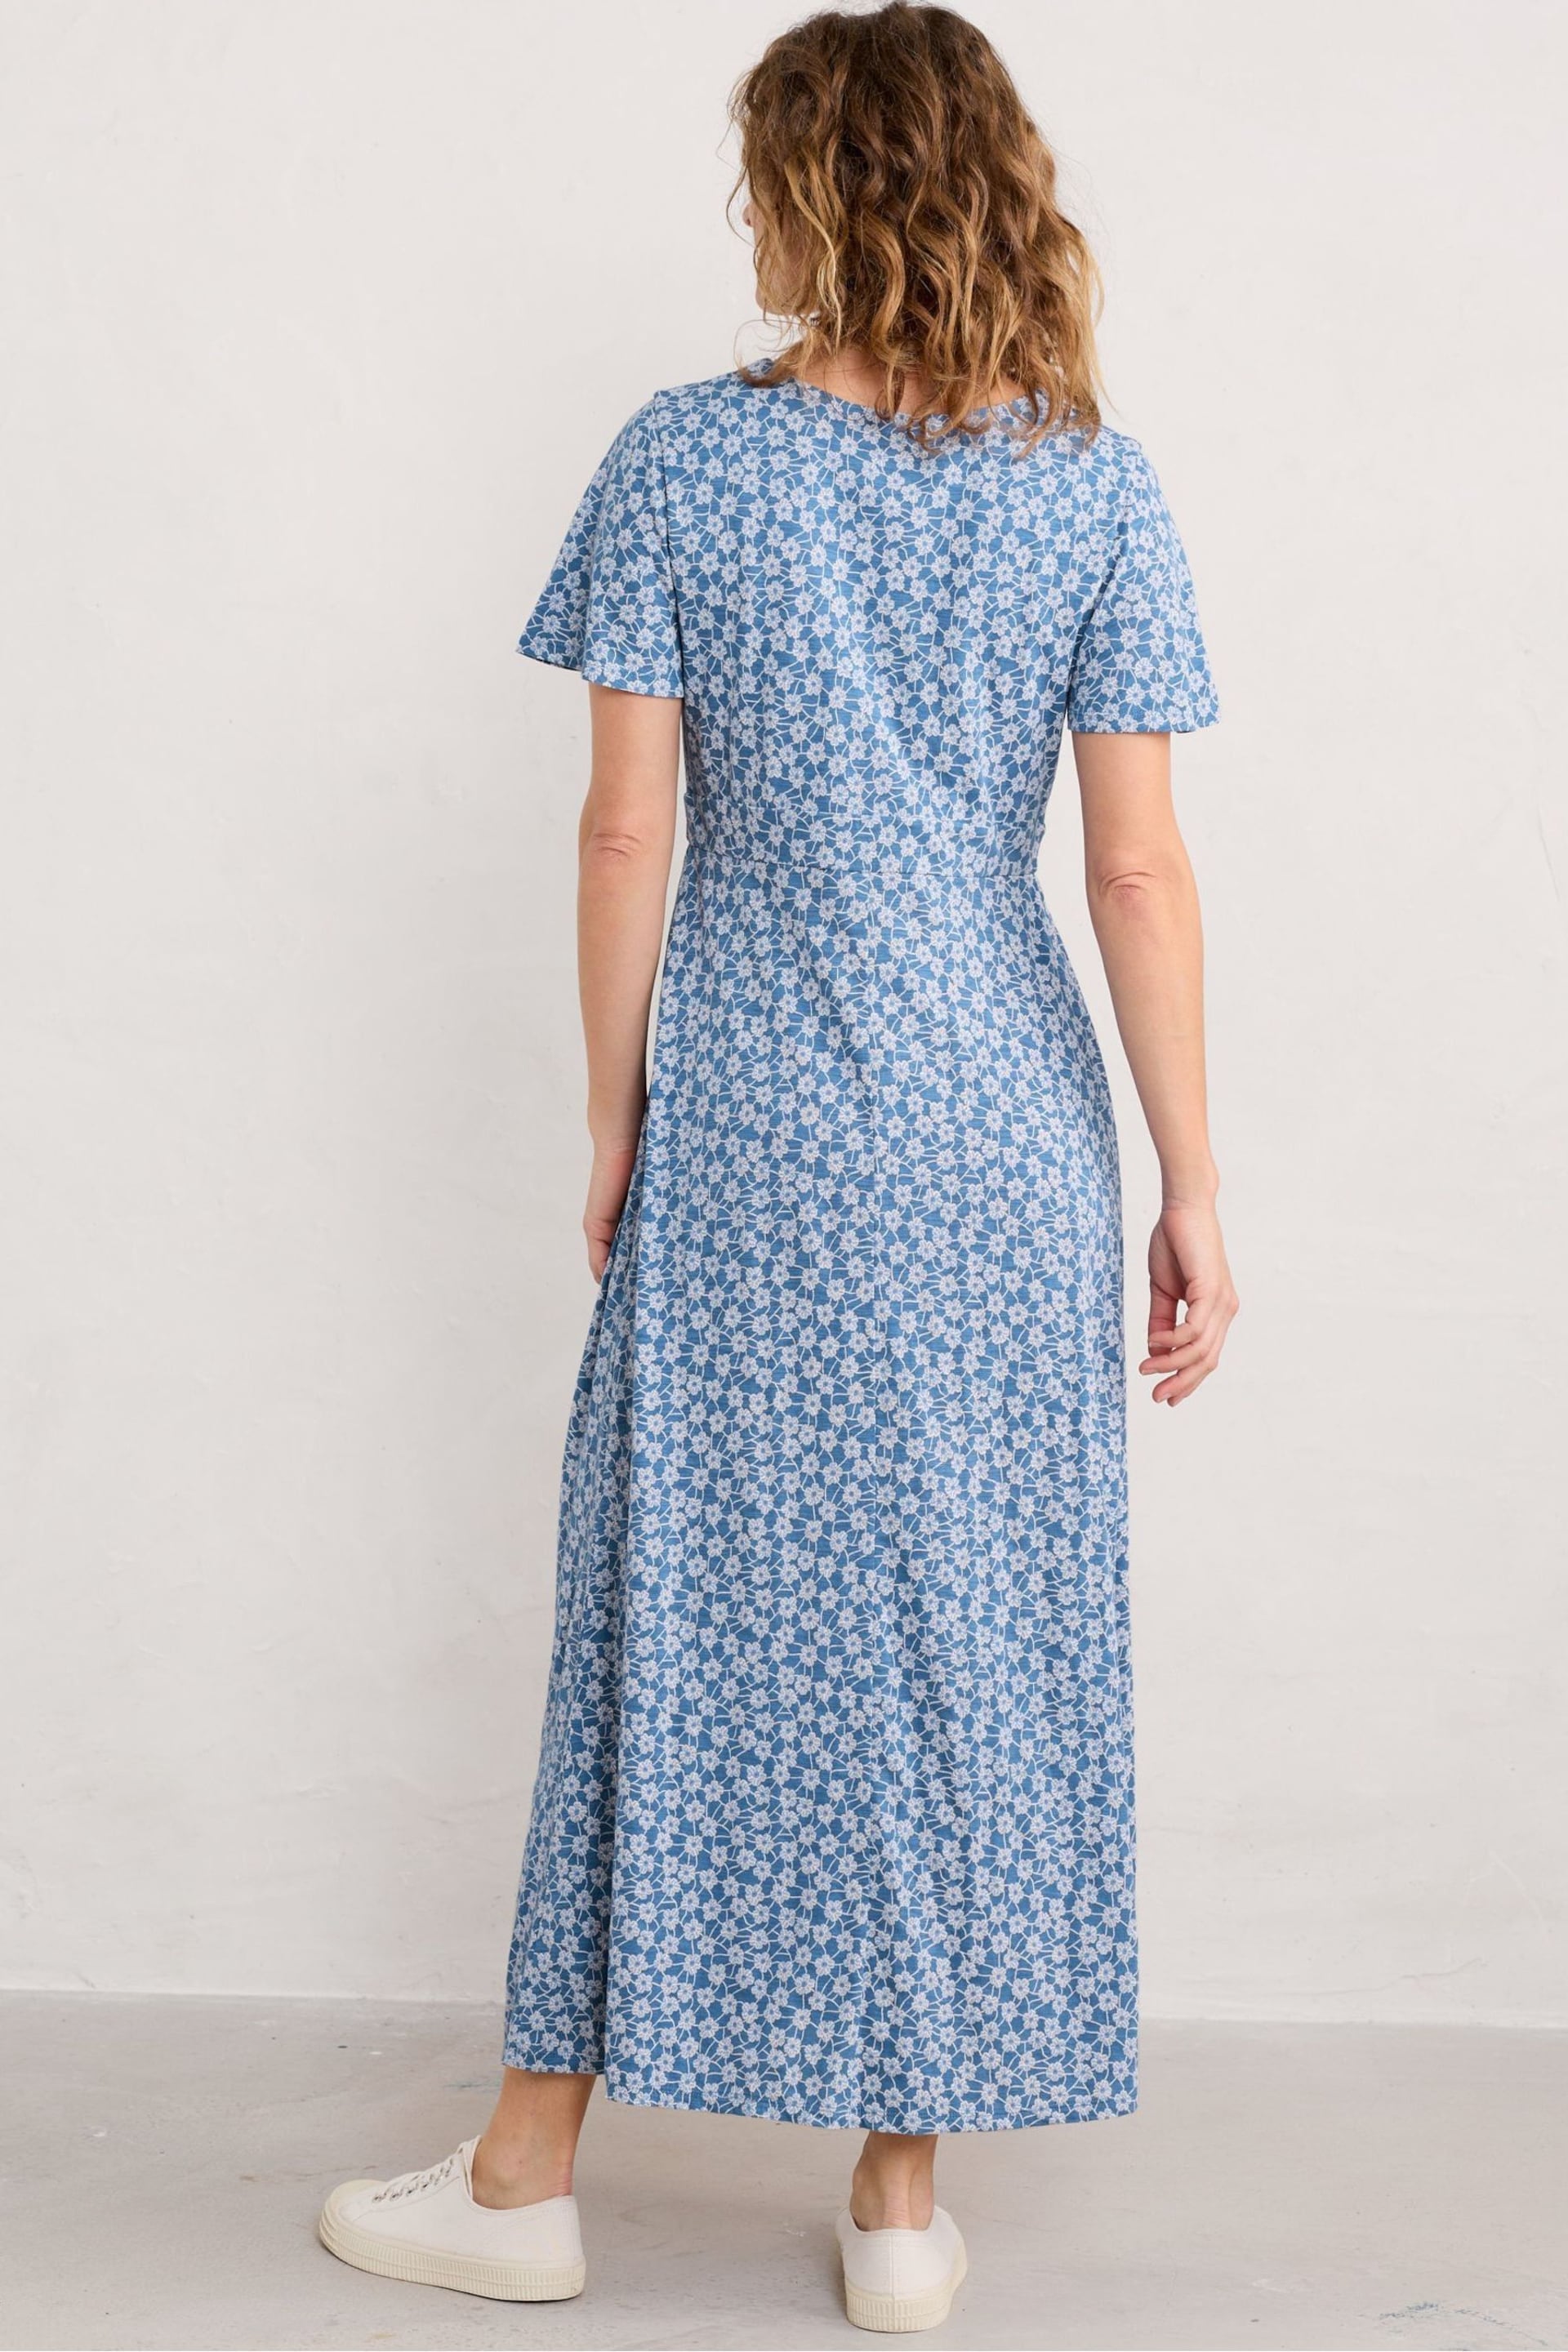 Seasalt Cornwall Blue Chateaux Dress - Image 2 of 5